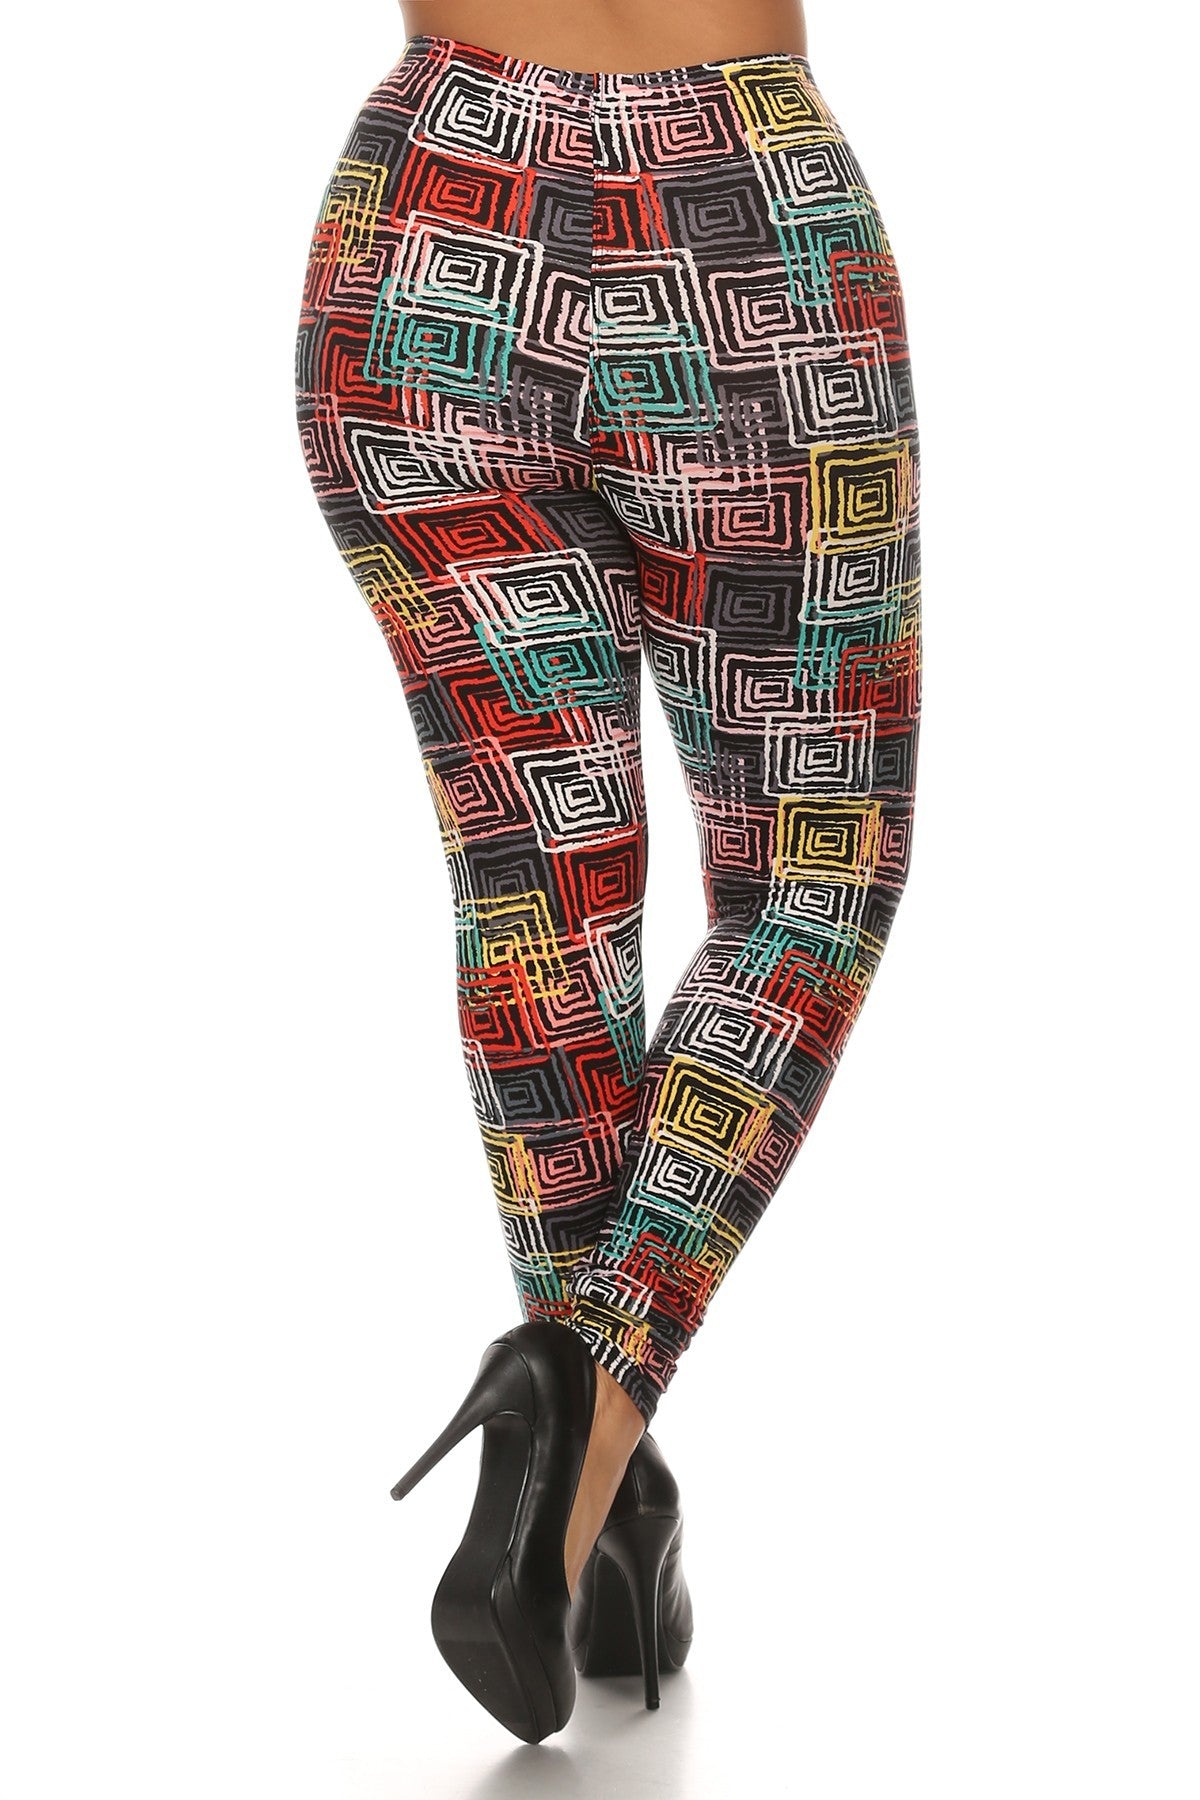 Abstract Geometric Printed Knit Legging With Elastic Waistband, And High Waist Fit - K I T S H O P 